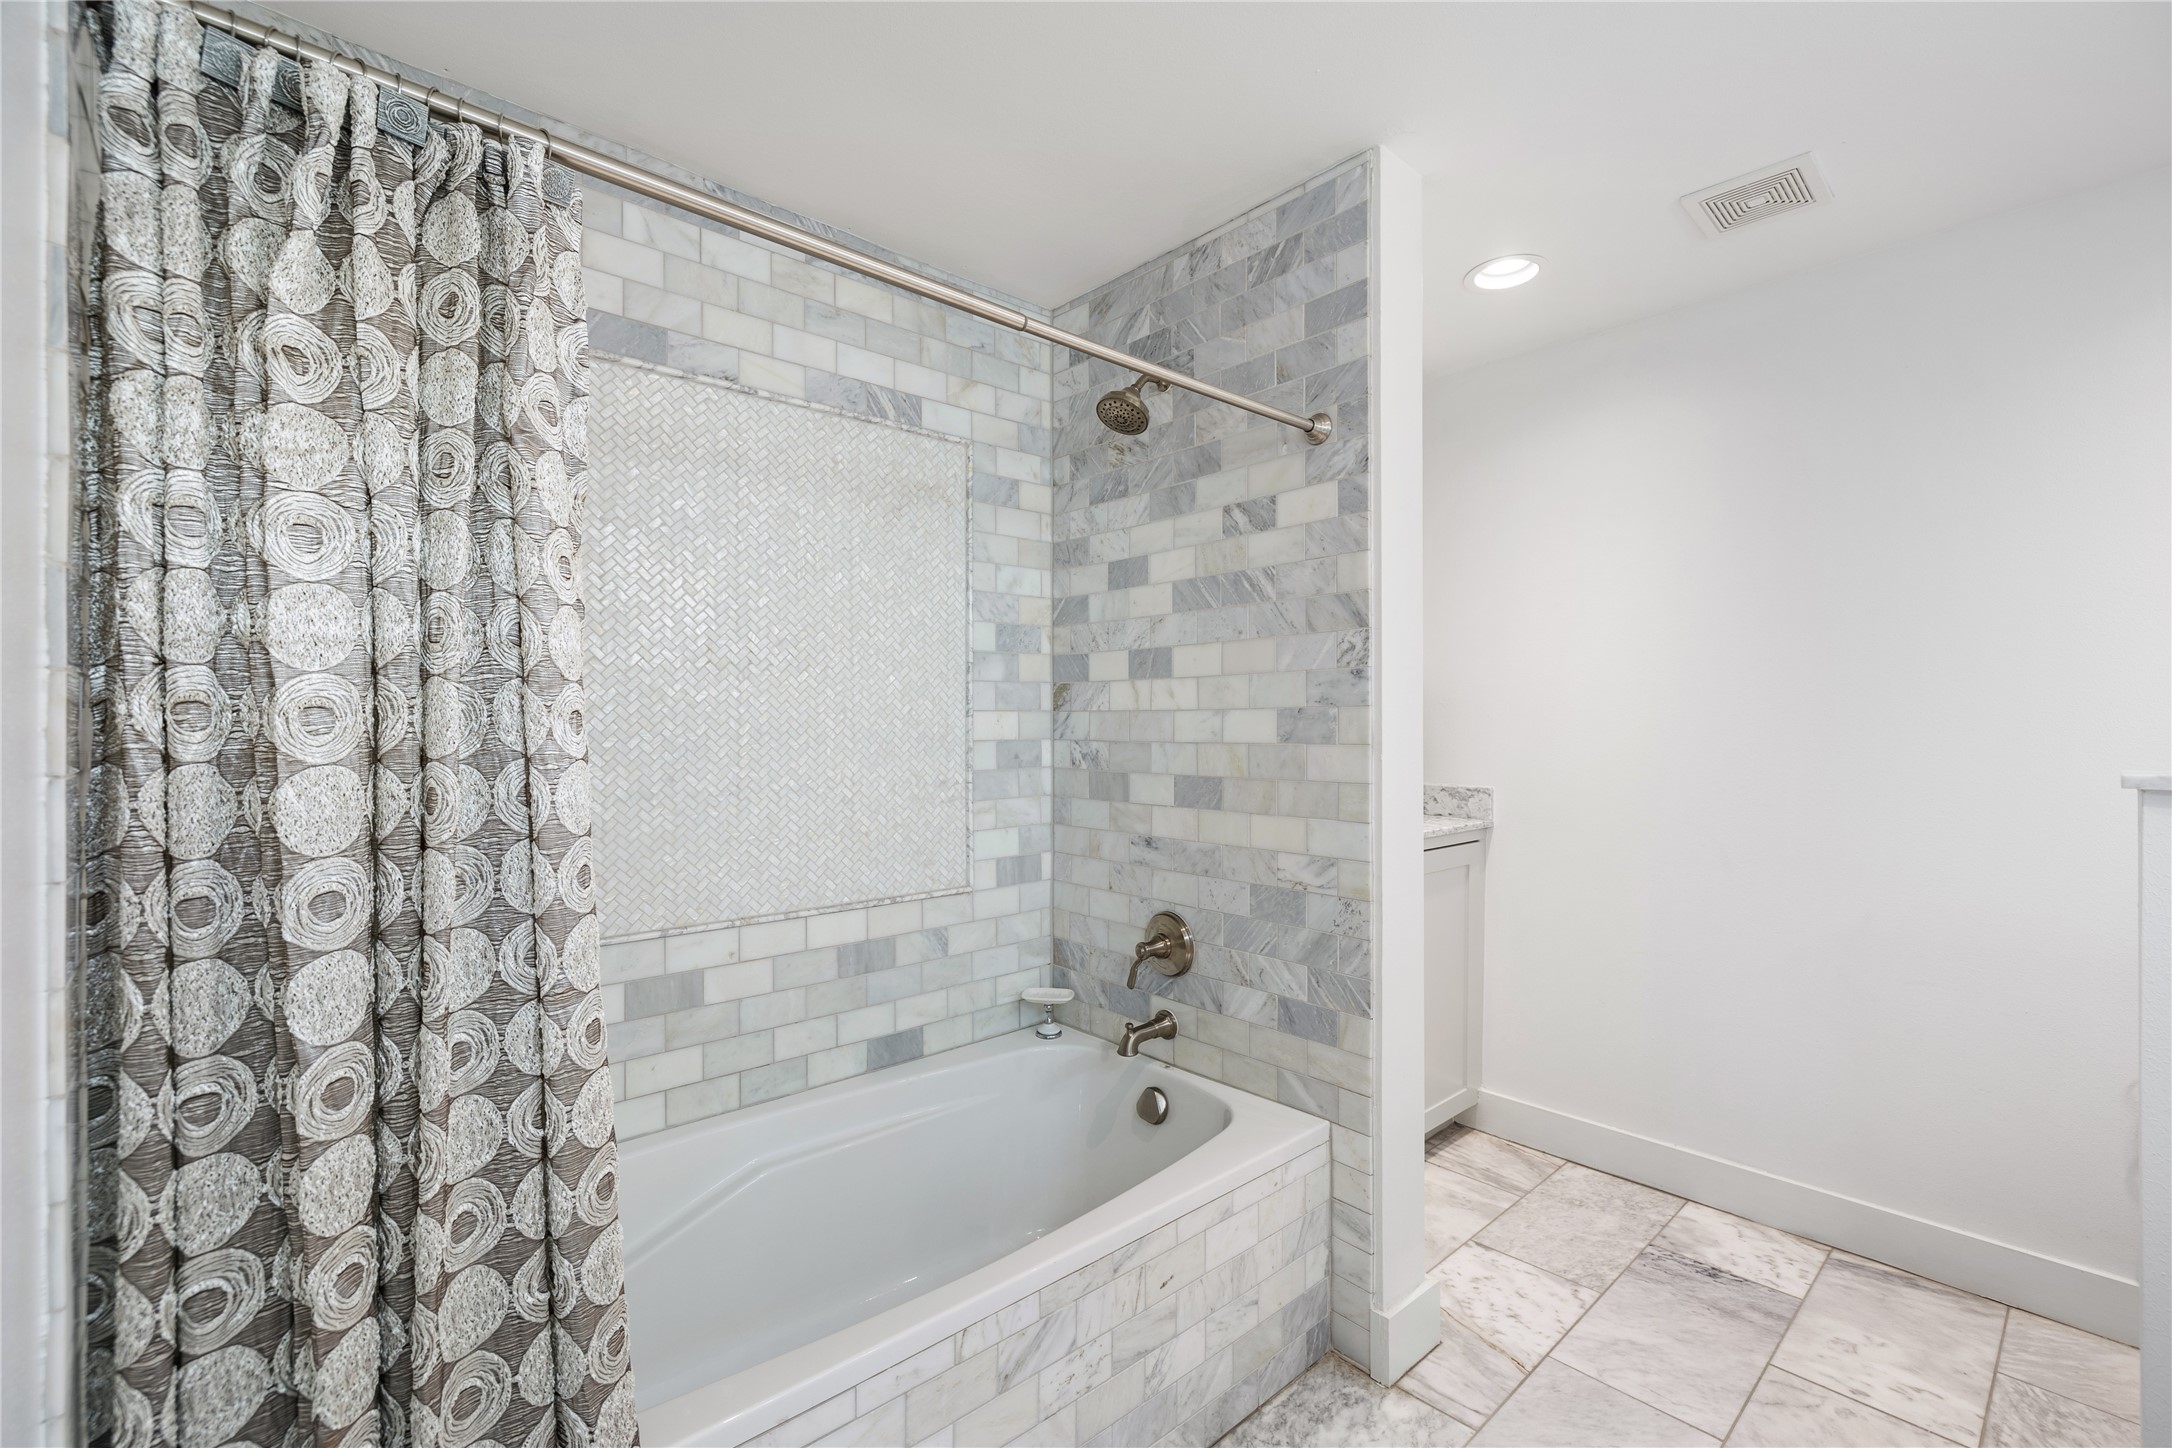 Adorned with marble and mother-of-pearl tilework, you will feel like you're at a spa in this bathroom.